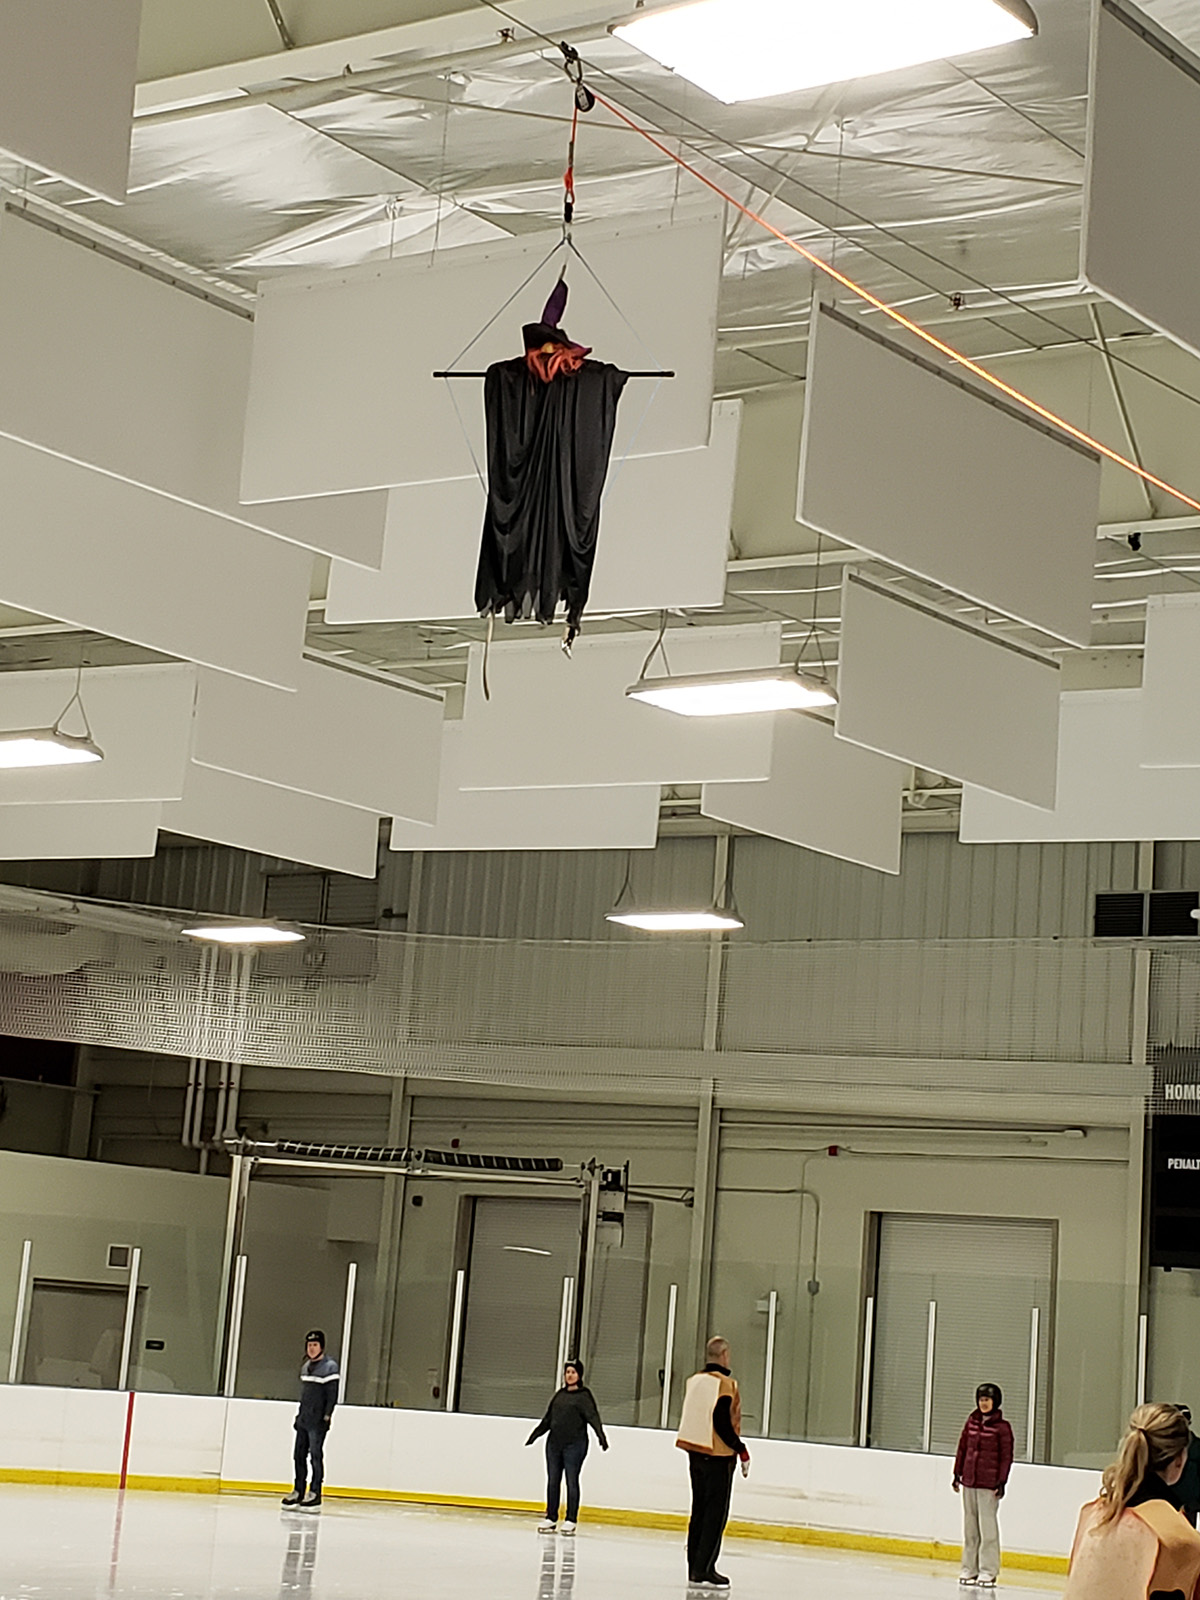 A witch decoration hanging from the rafters of an ice rink.